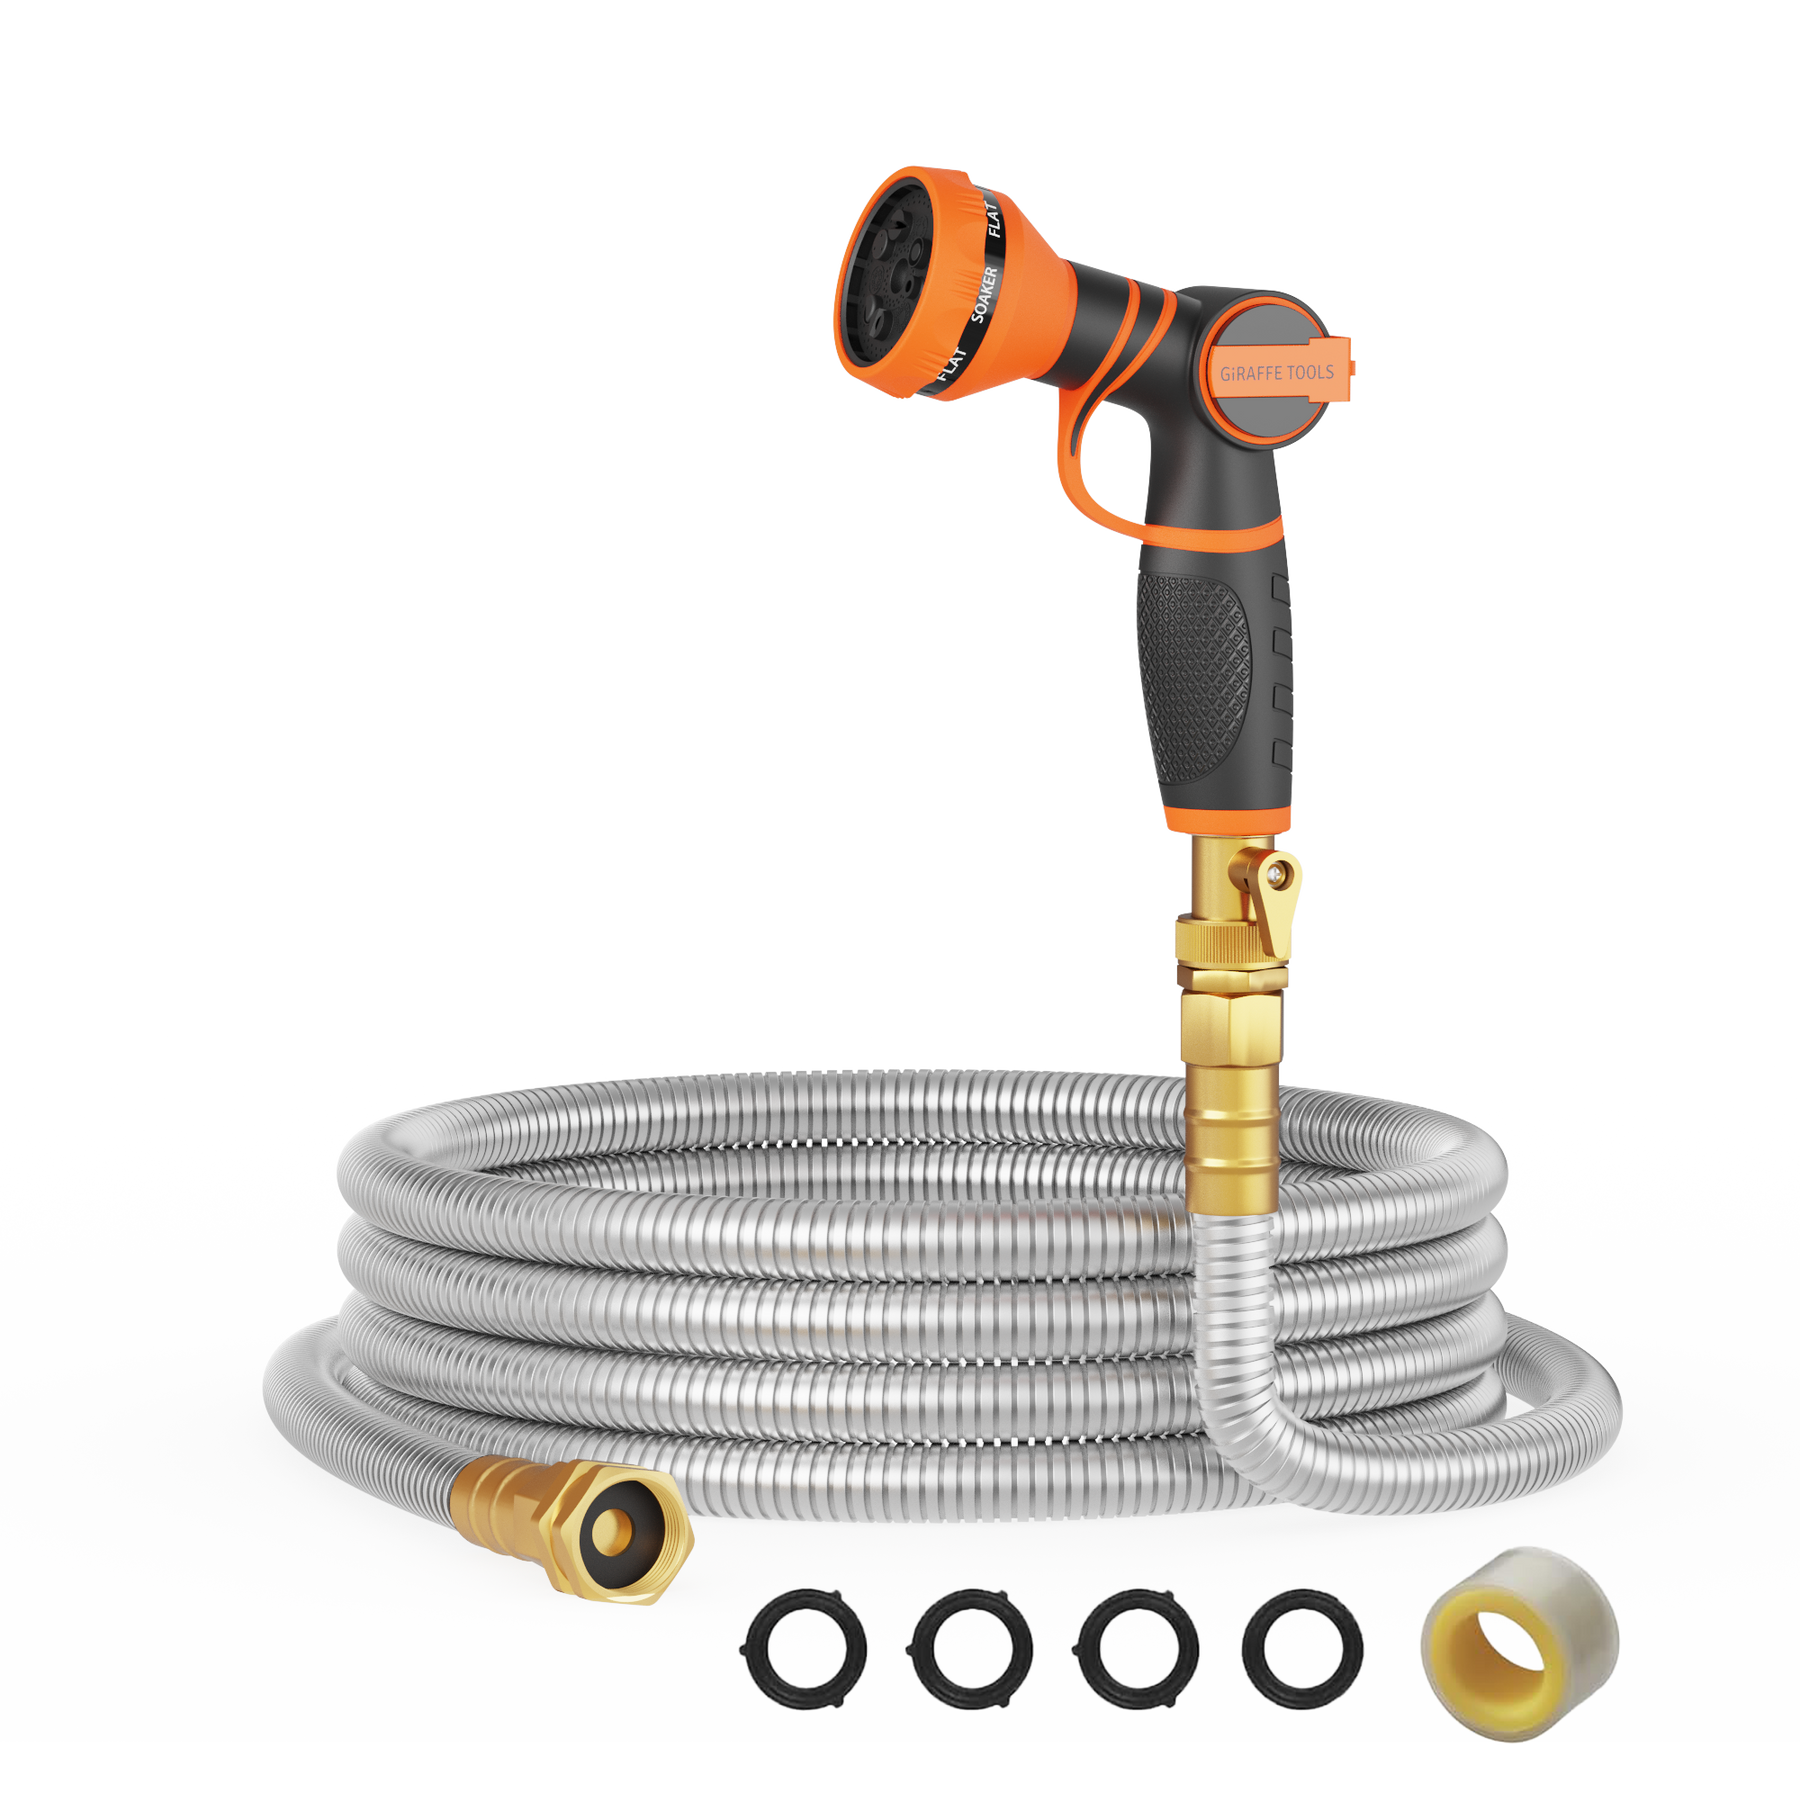 Stainless Steel Water Hose 25ft-100ft